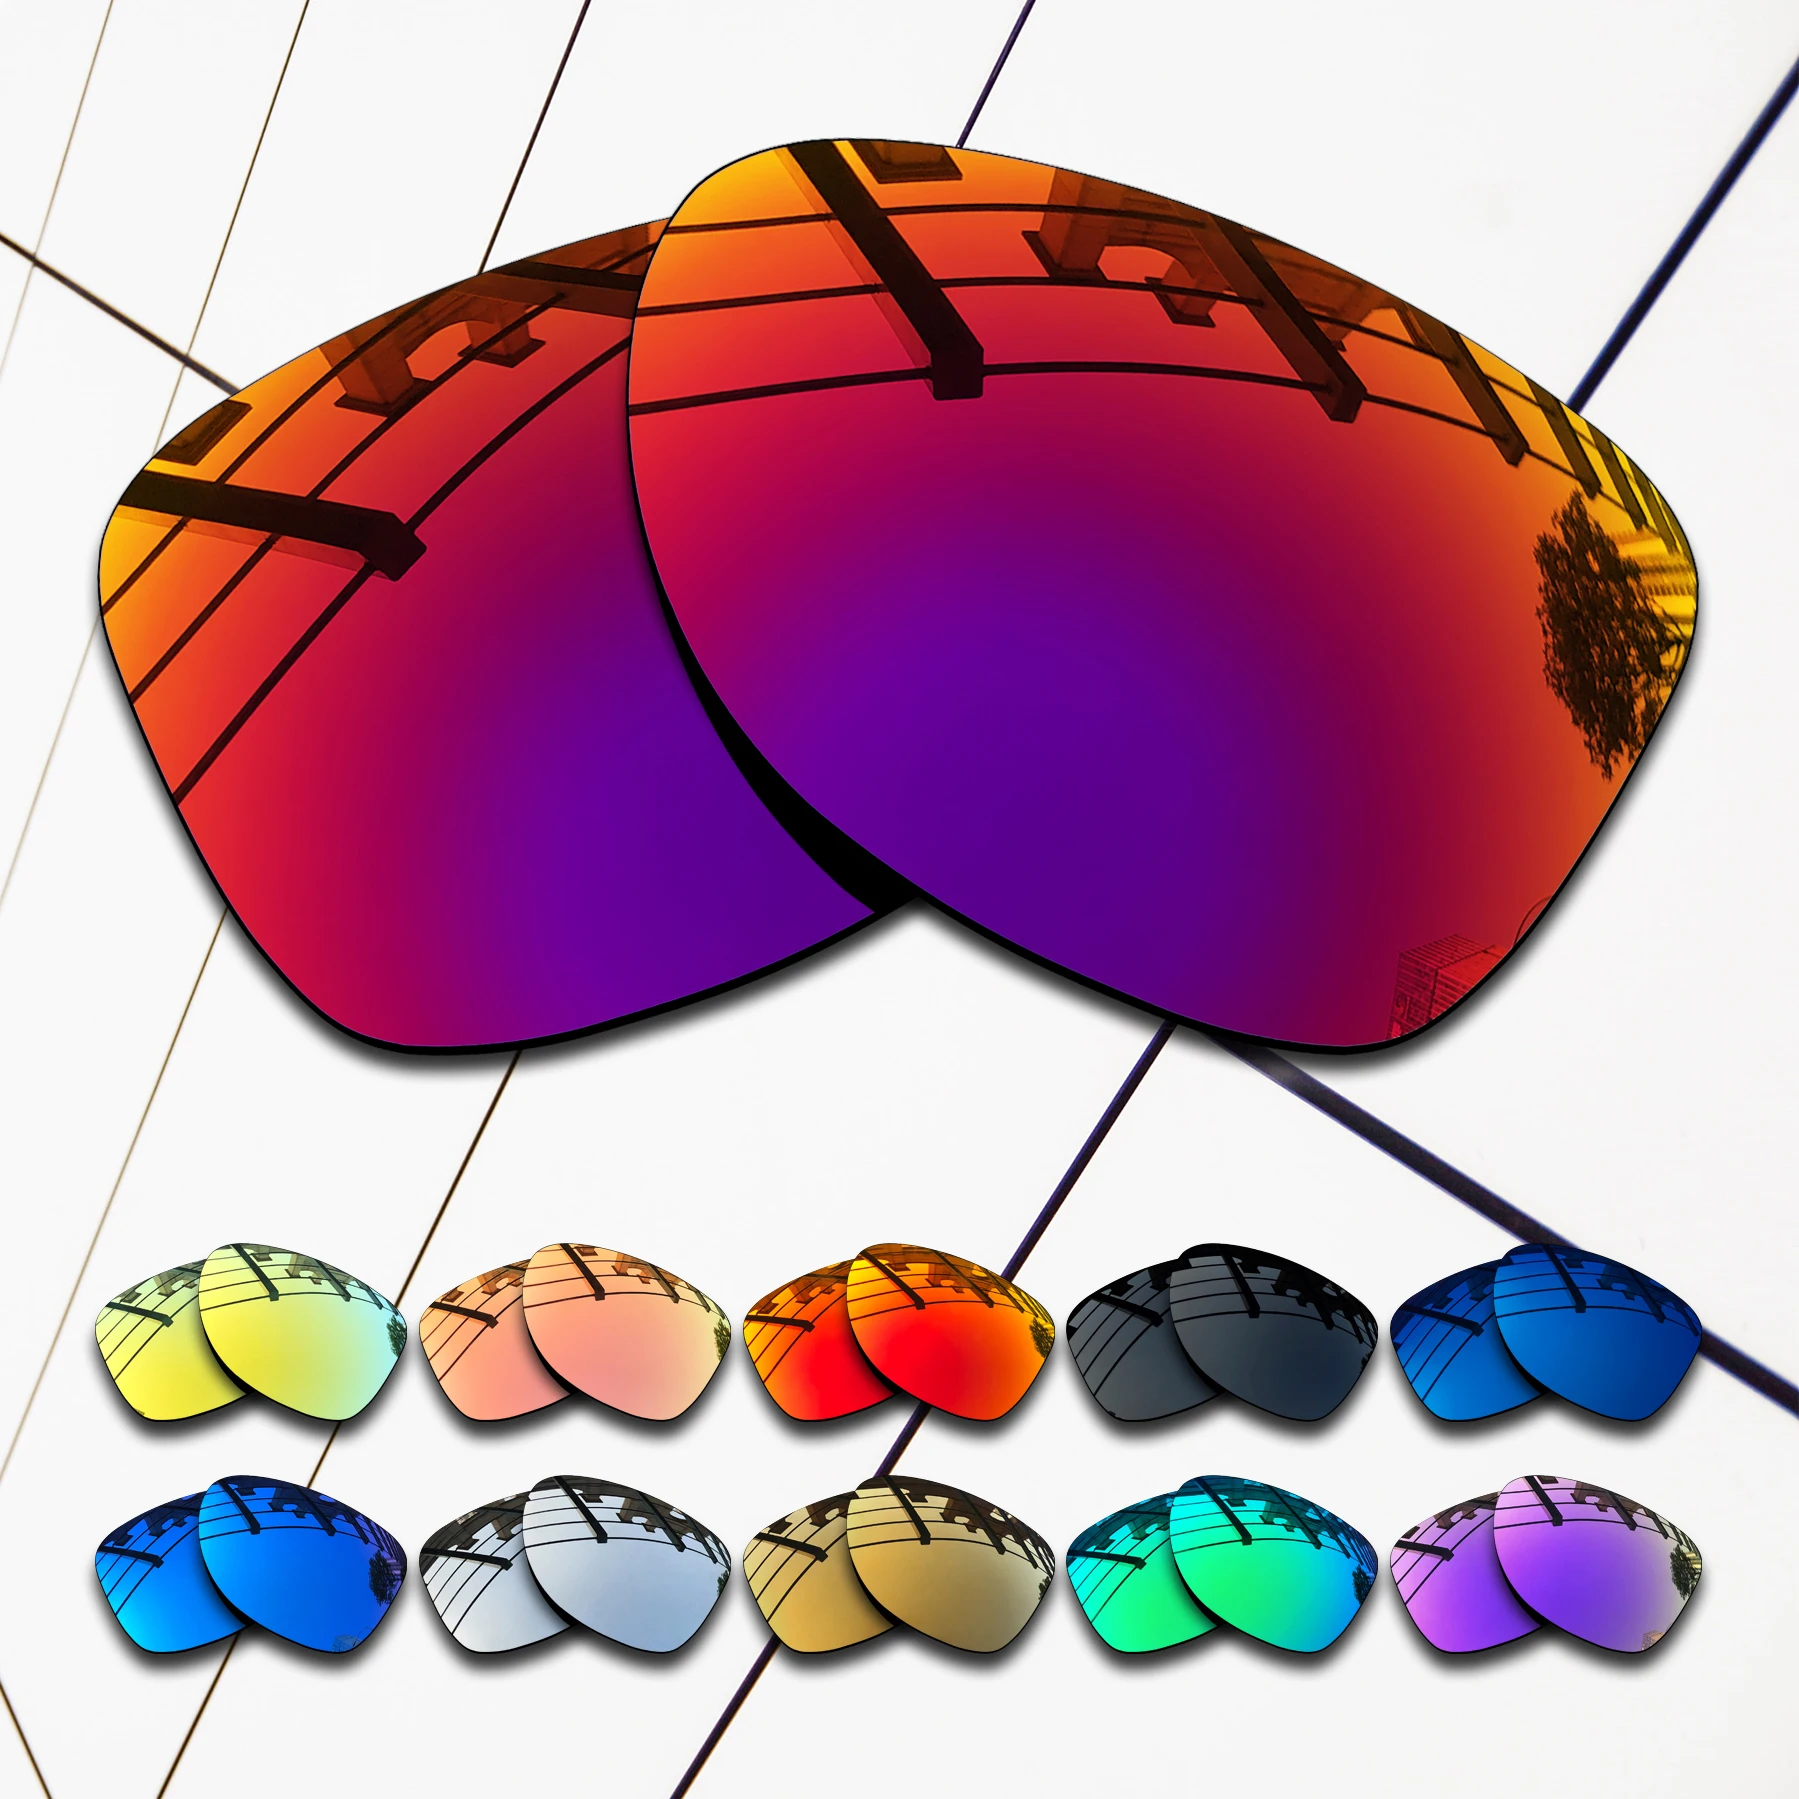 Wholesale E.O.S Polarized Replacement Lenses for Oakley Cohort OO9301 Sunglasses - Varieties Colors